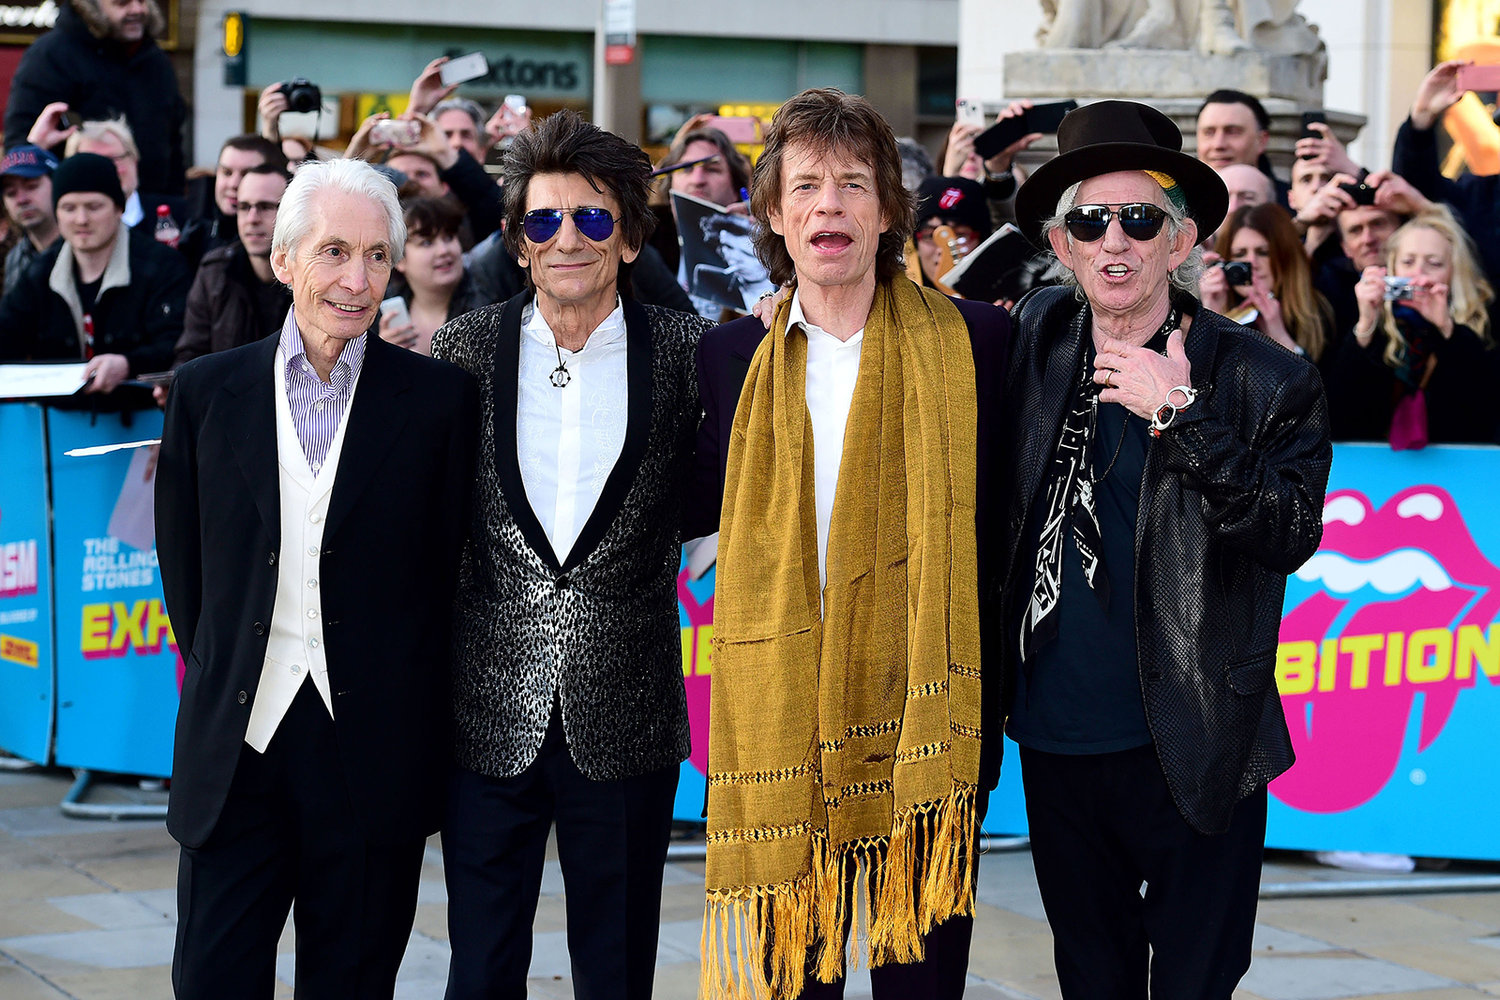 From left, Charlie Watts, Ronnie Wood, Mick Jagger and Keith Richards of The Rolling Stones on April 4, 2016, in London. Watts has died at age 80. (Ian West/PA Wire/Zuma Press/TNS)